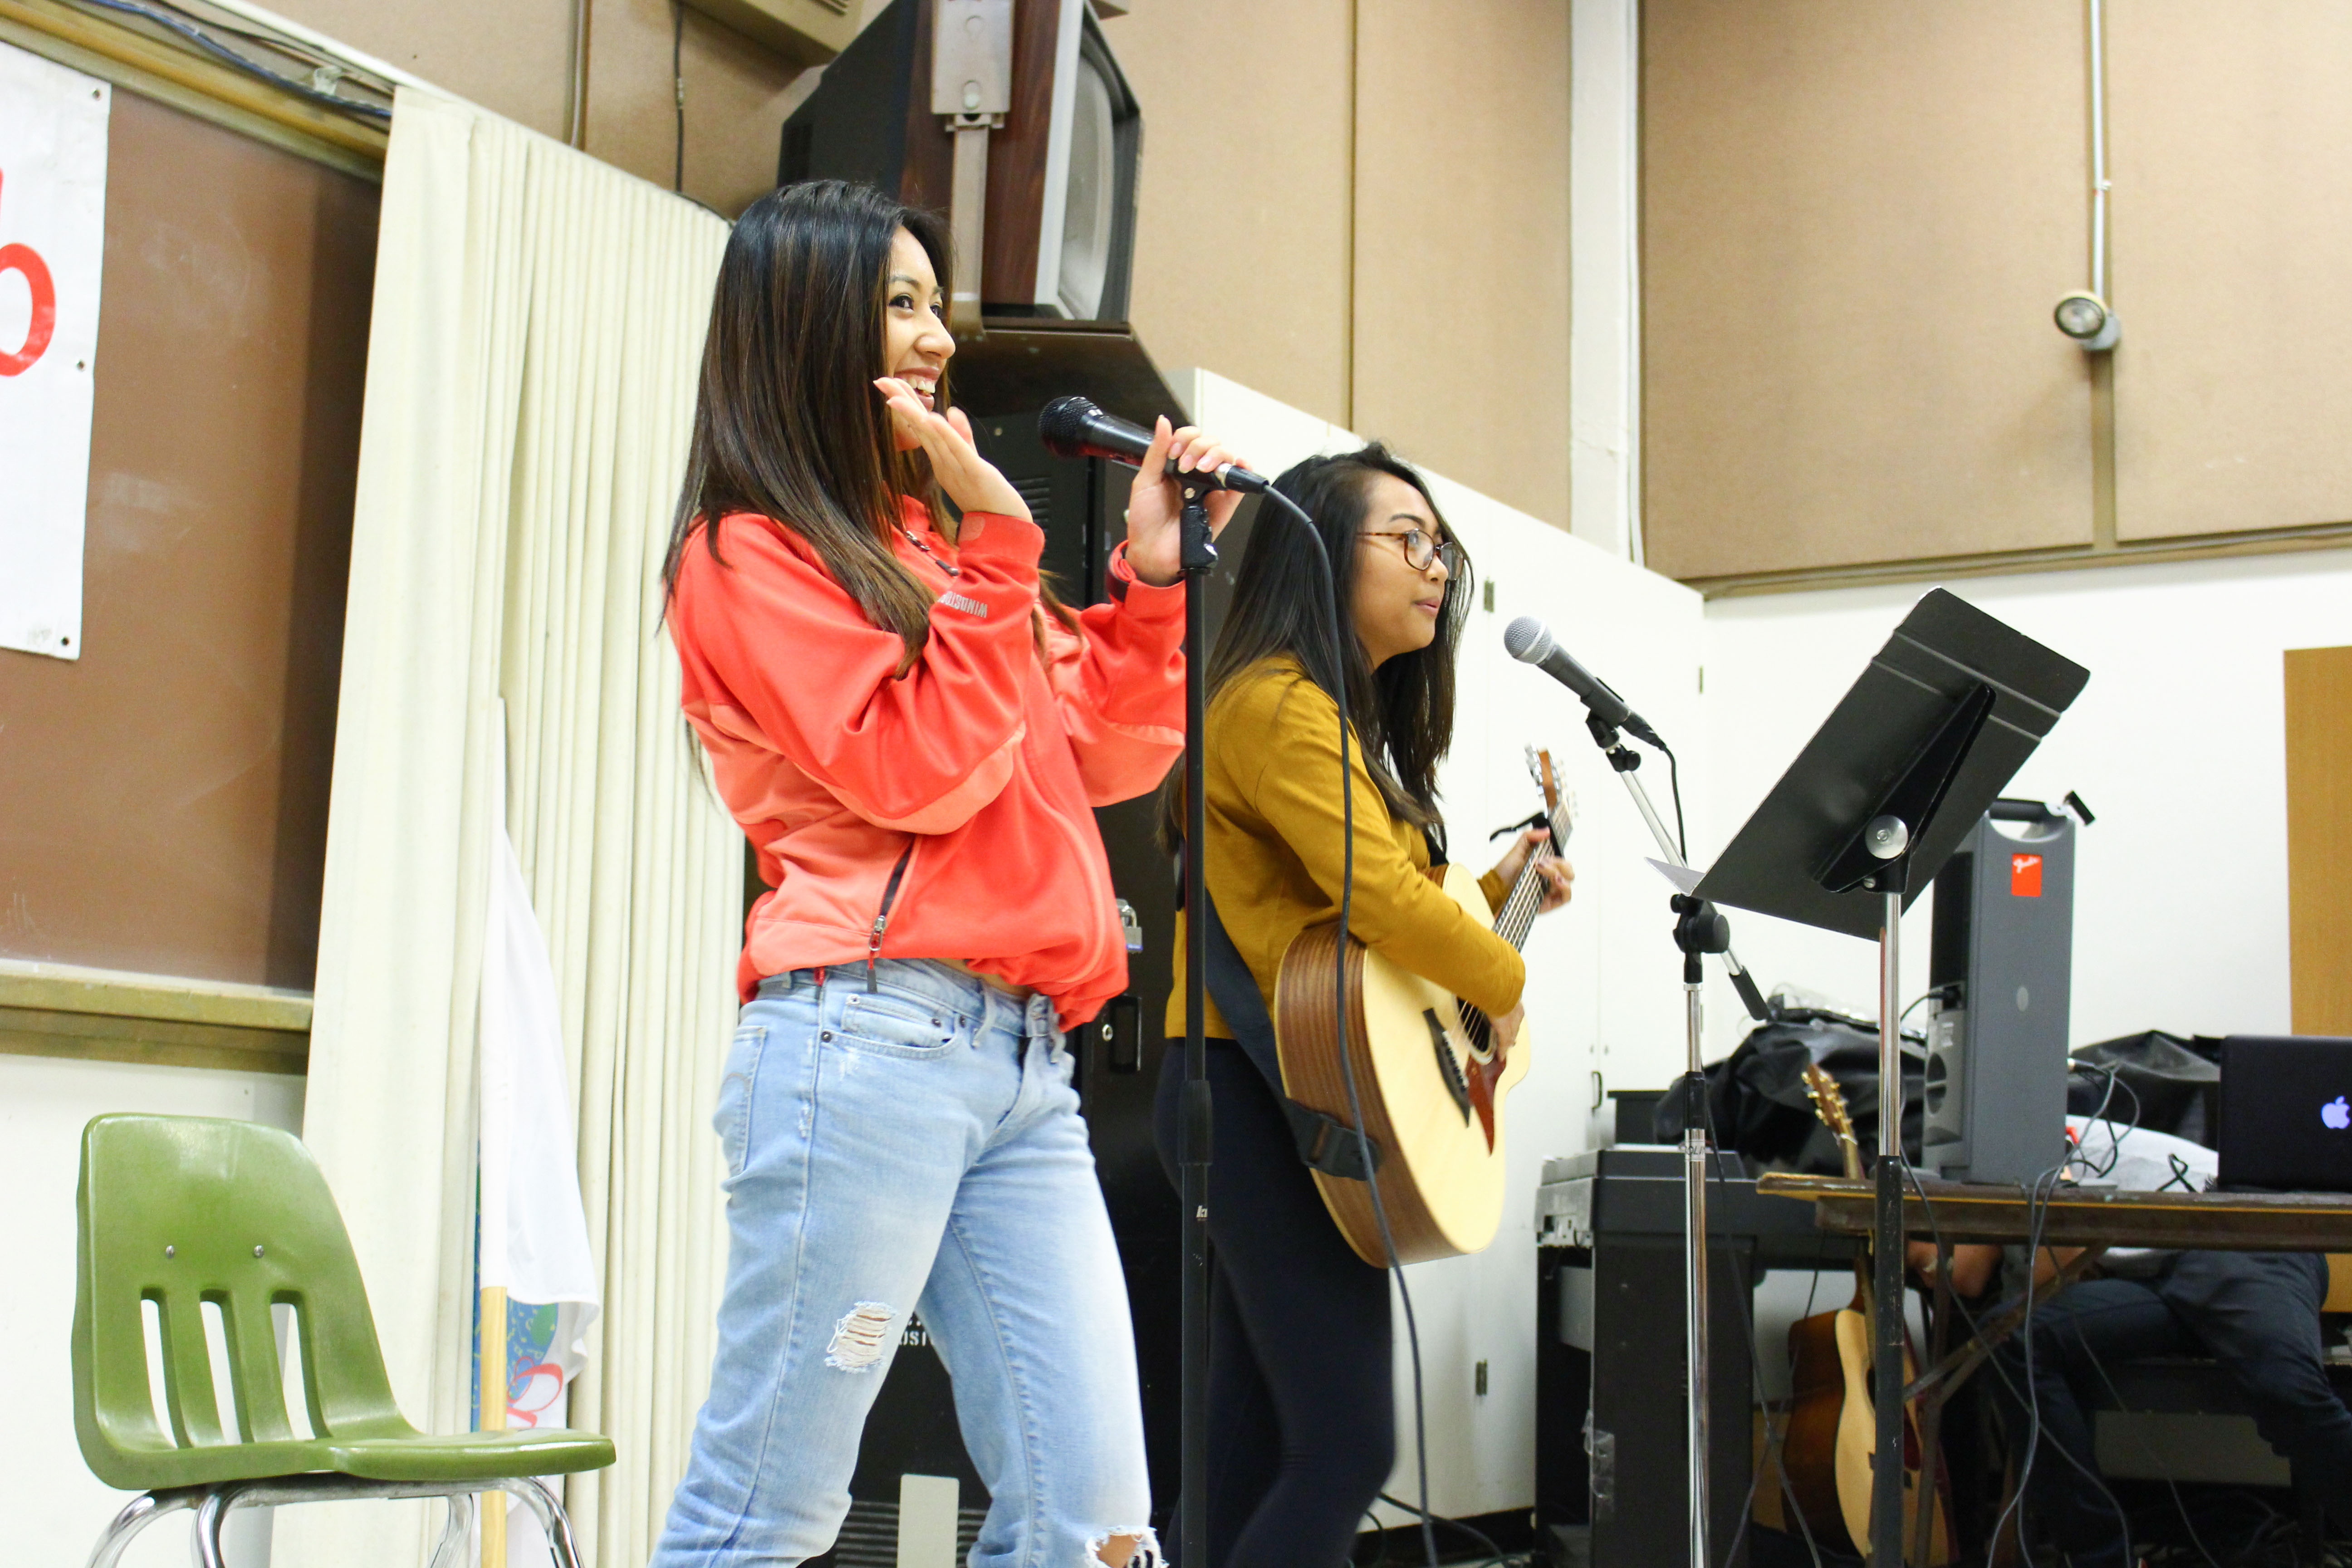 Margaret Delossantos and Jessie Bisco perform as a duet at the World Music Club’s Singing Contest on Friday, Nov. 20, 2015. (By Shannon Cole/The Guardsman